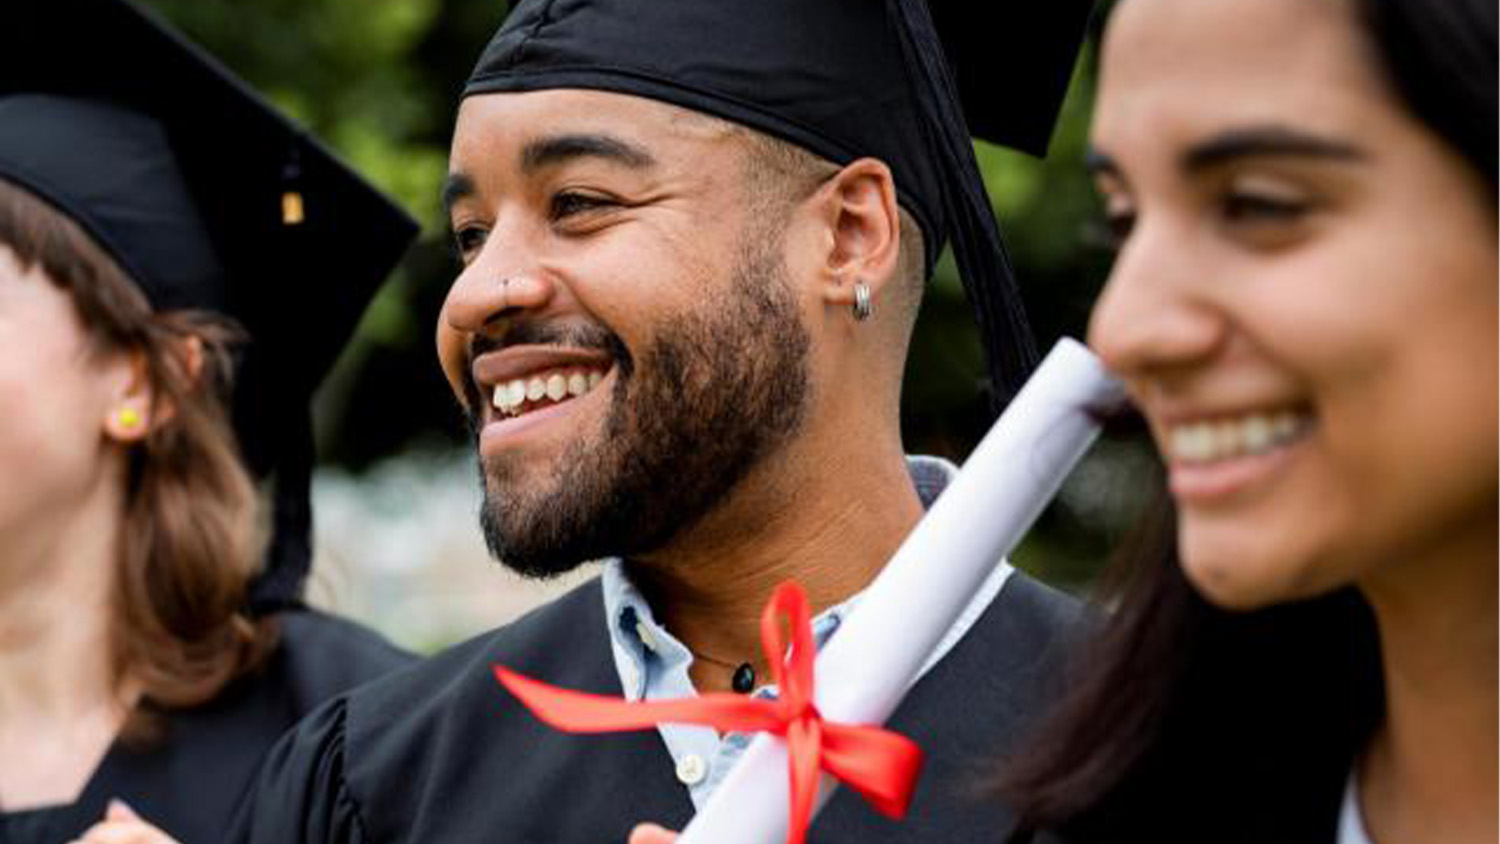 A Smiling graduate holding a diploma